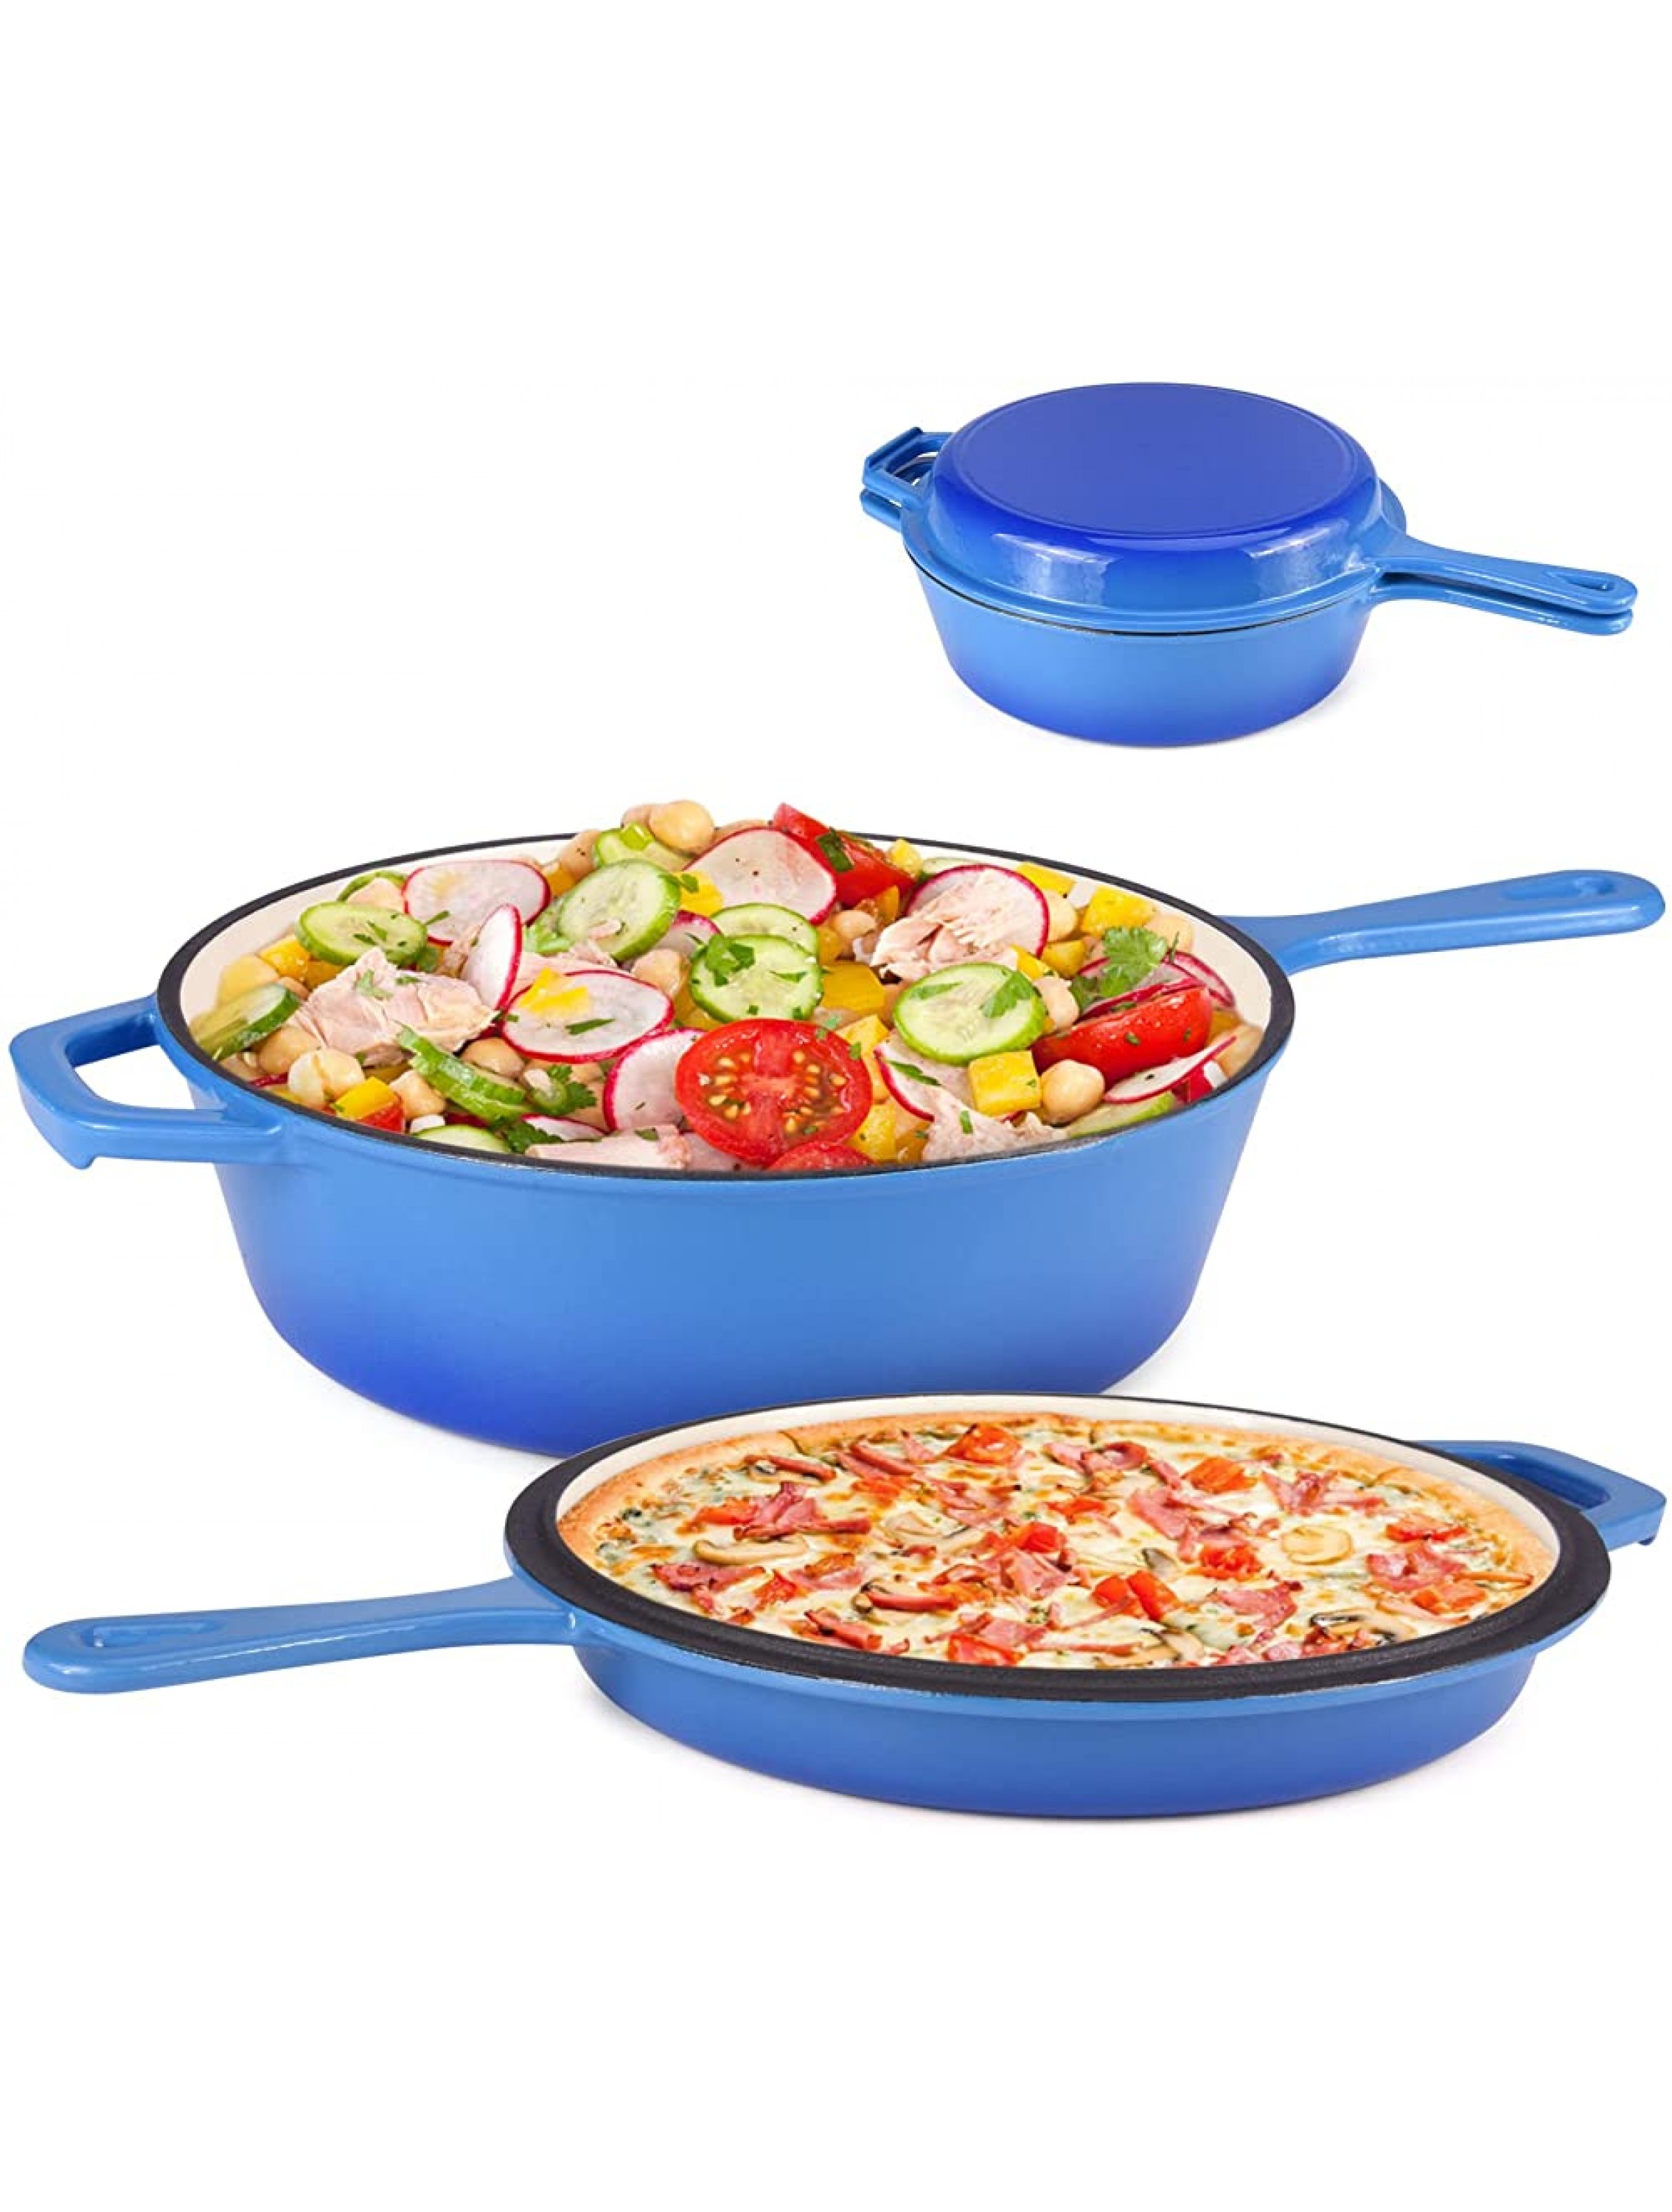 Suteck Enameled Cast Iron 2-In-1 Skillet Set Heavy Duty 3.2 Quart Enamel Cookware Pot and Lid Set Deep Saucepan and Shallow Skillet Dutch Oven Nonstick Frying Pan for Chef Kitchen Blue - B8X7XC690